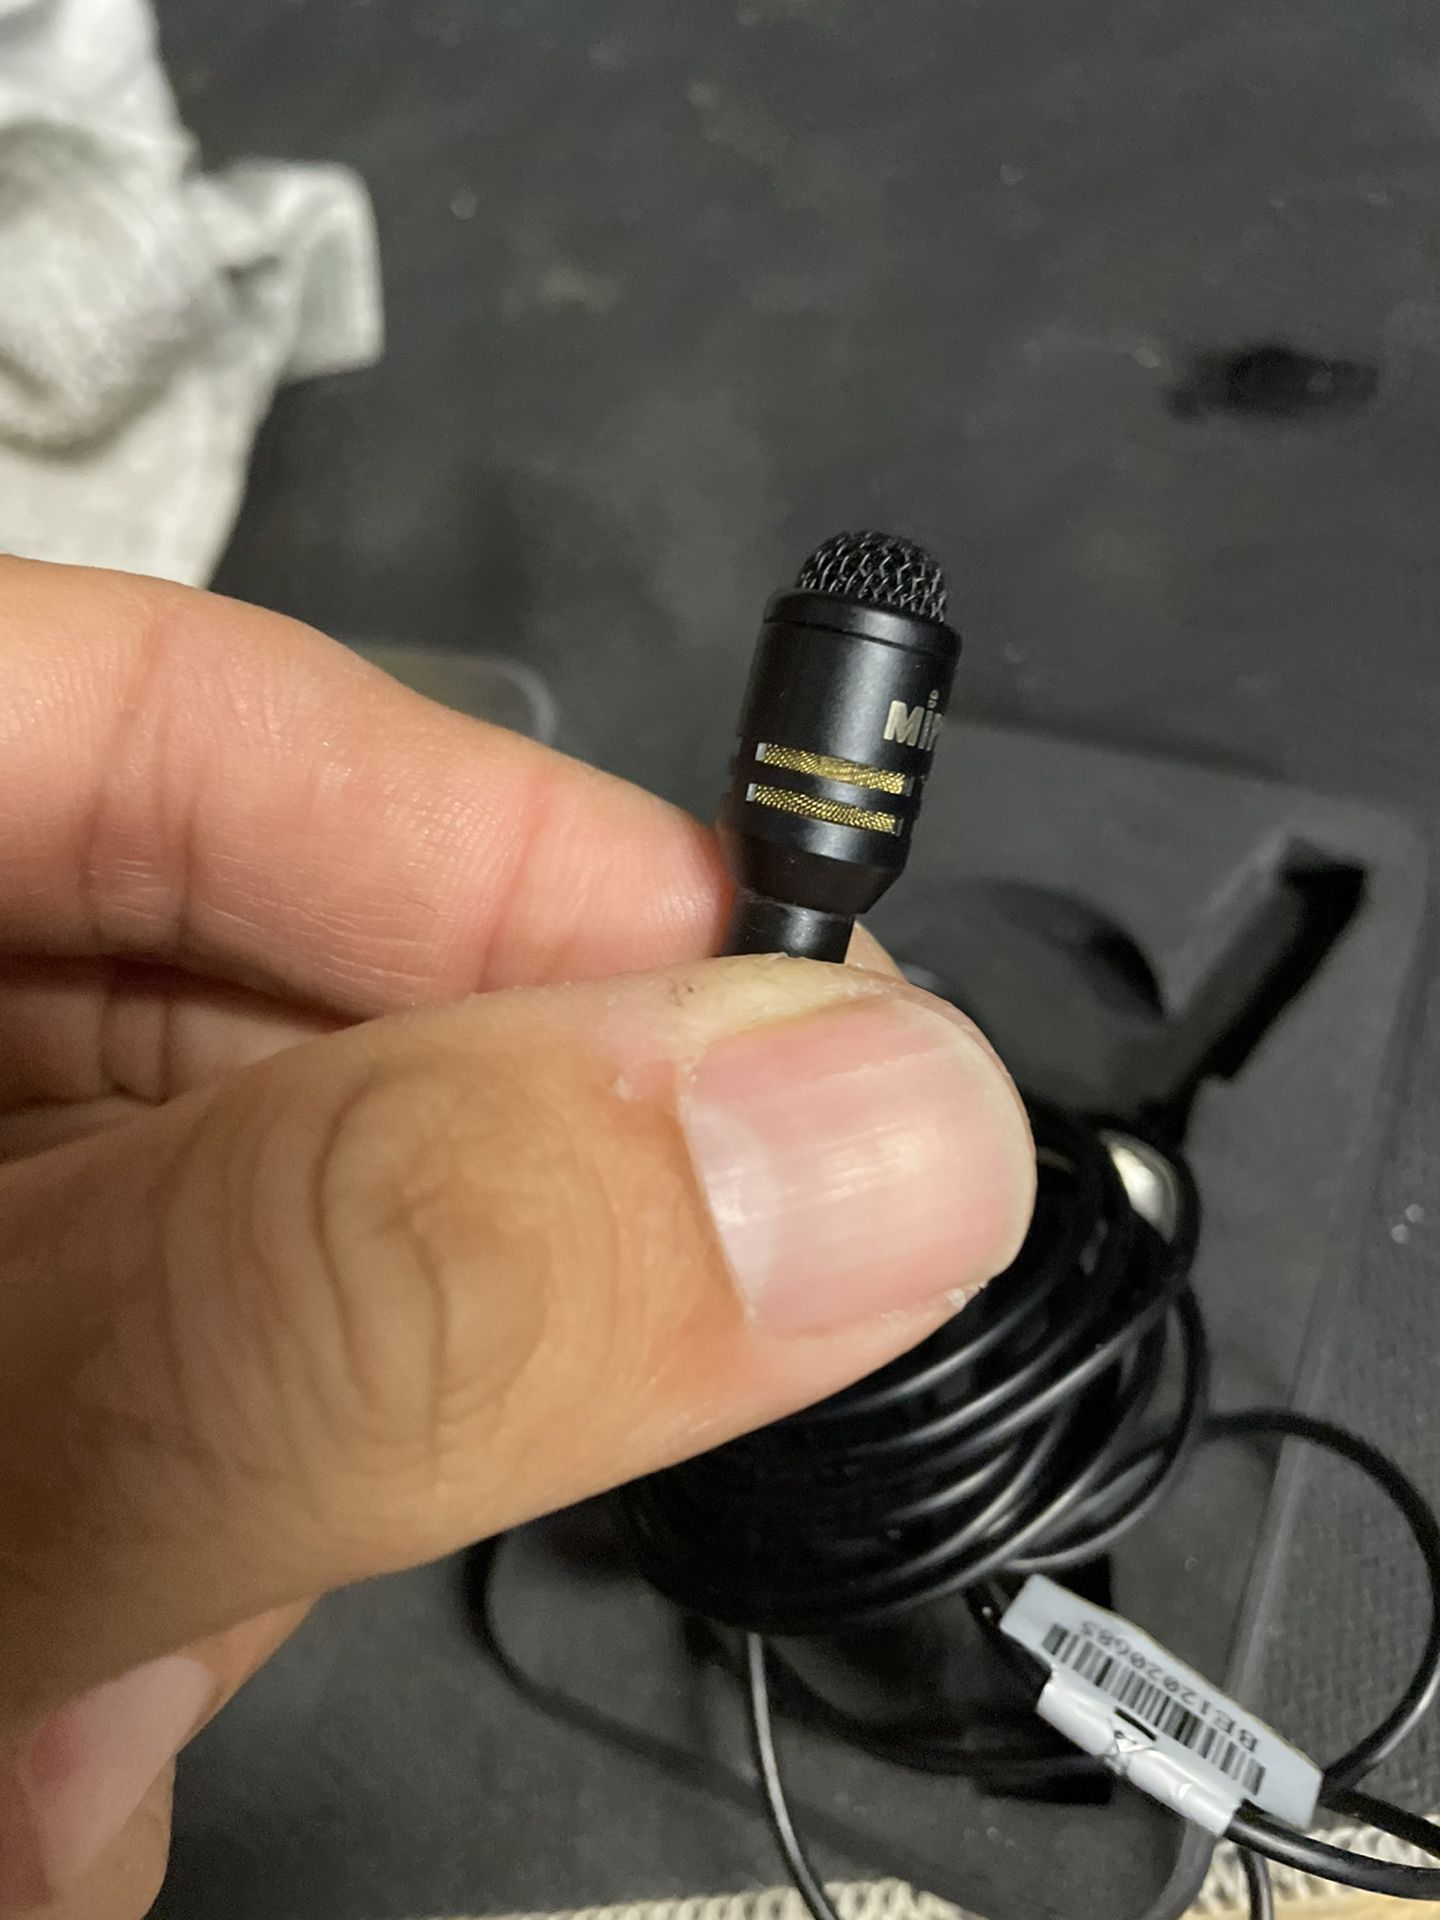 PROFESSIONNAL Lavalier Microphone Mipro